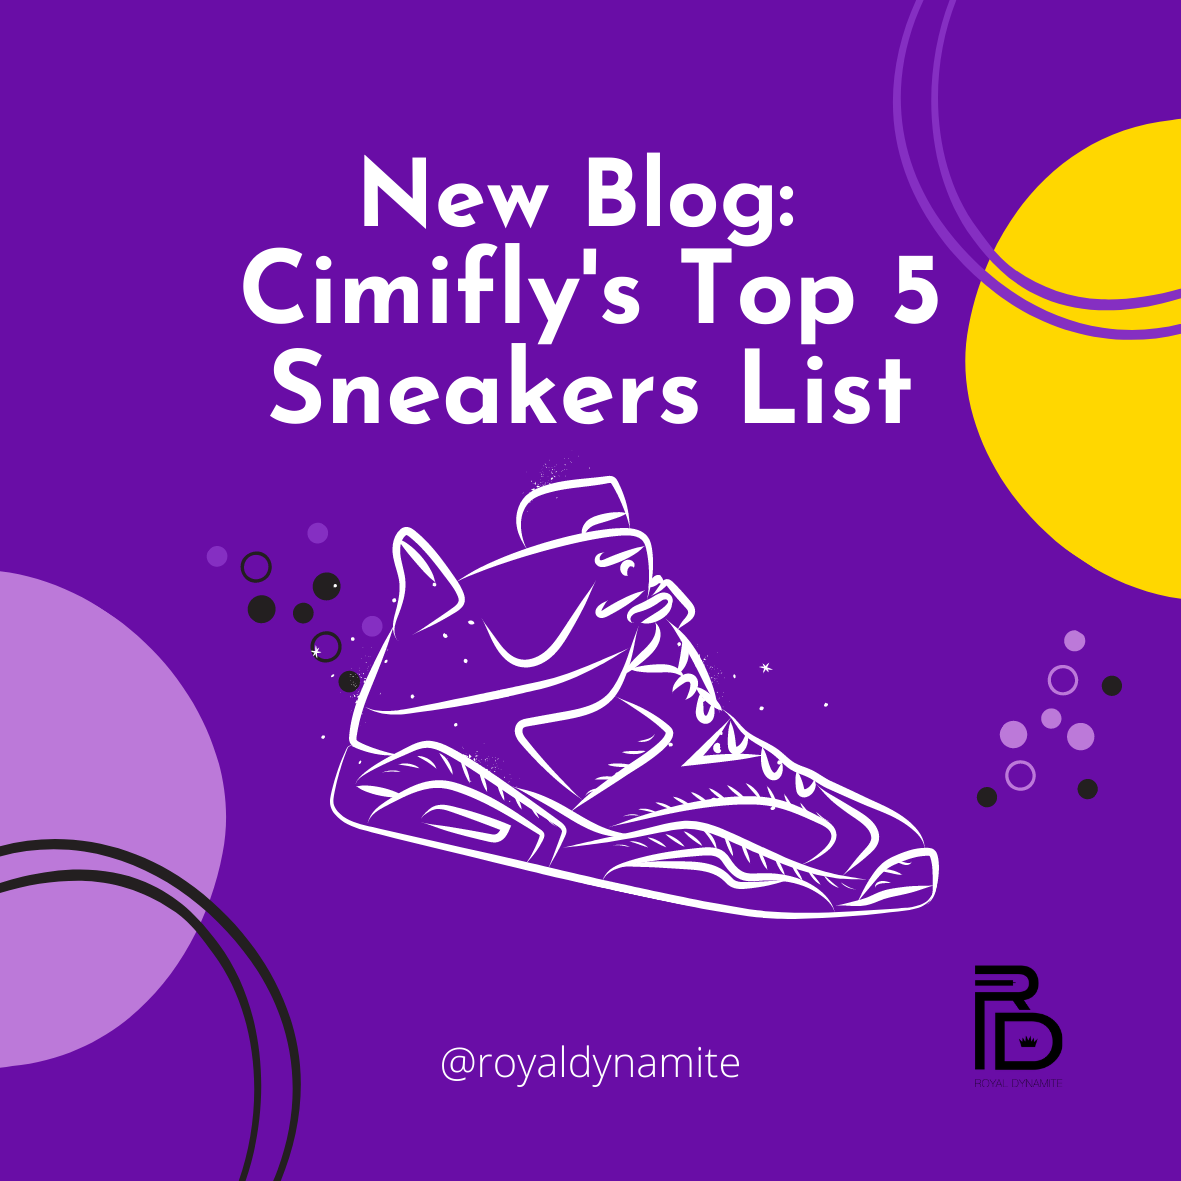 Cimifly's Top 5 Sneakers